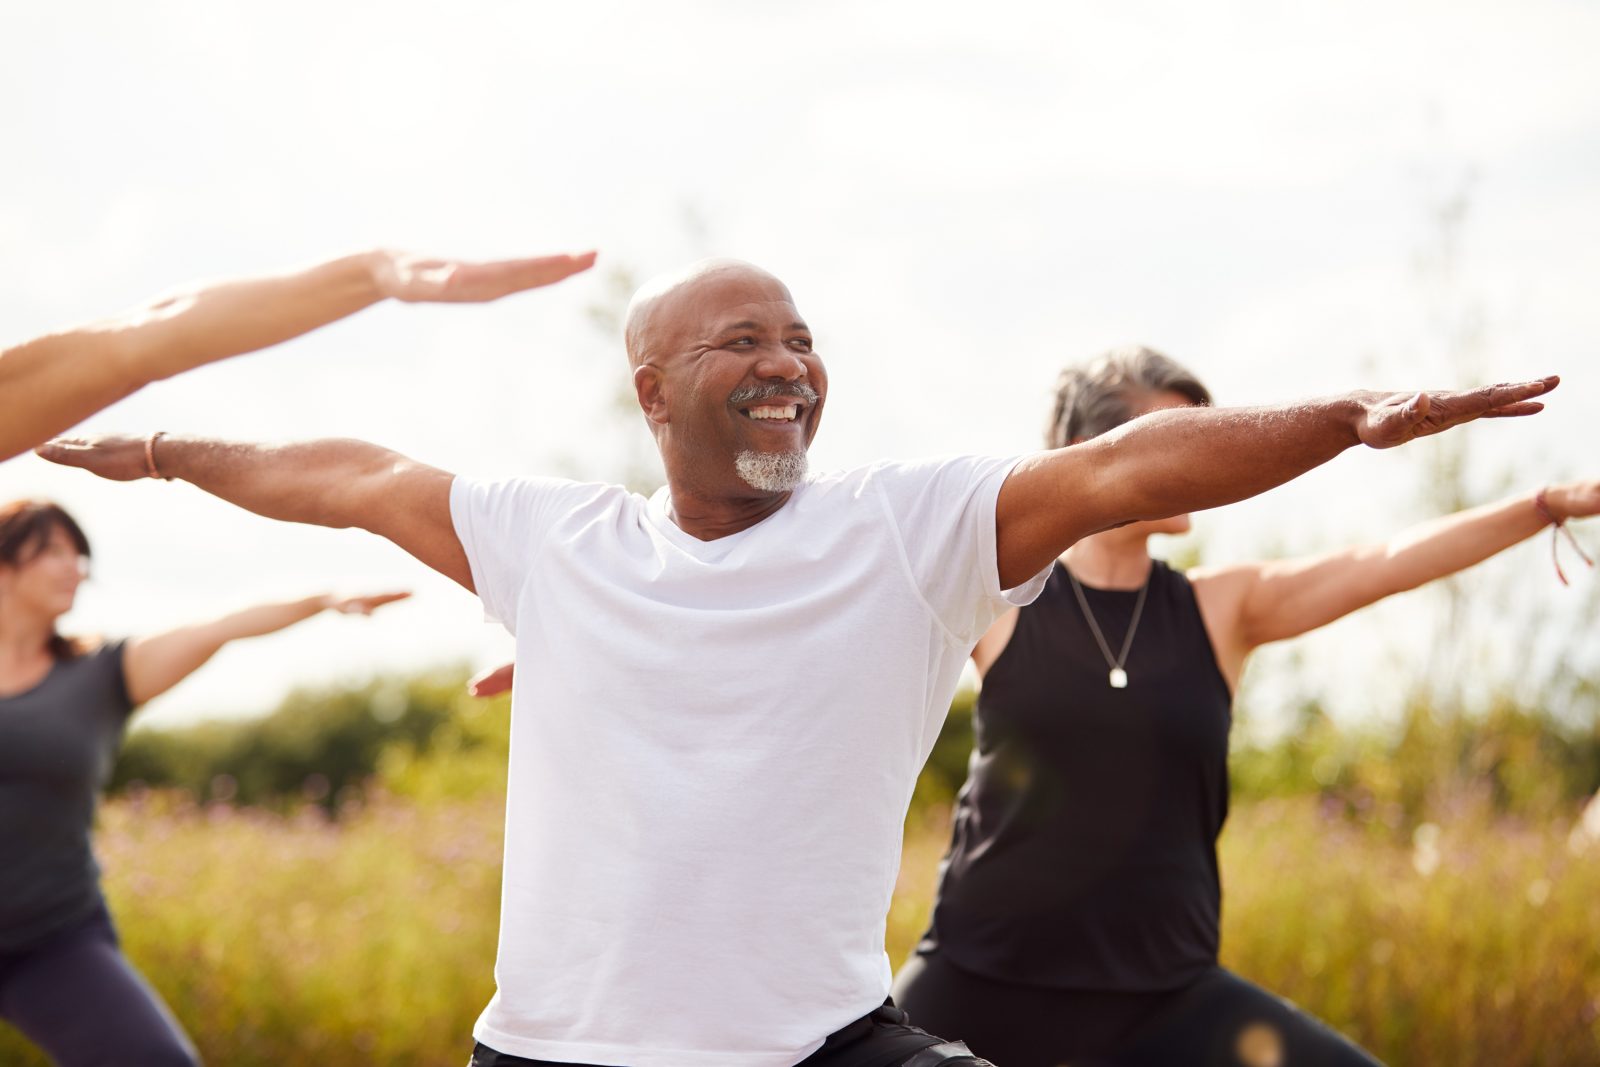 An older man does yoga outside with a group of other people of varying ages and genders. The man has a smile on his face as he performs warrior 2 pose, with his arms stretched straight out from his shoulders, parallel to the ground, and his face looking towards one of his hands.